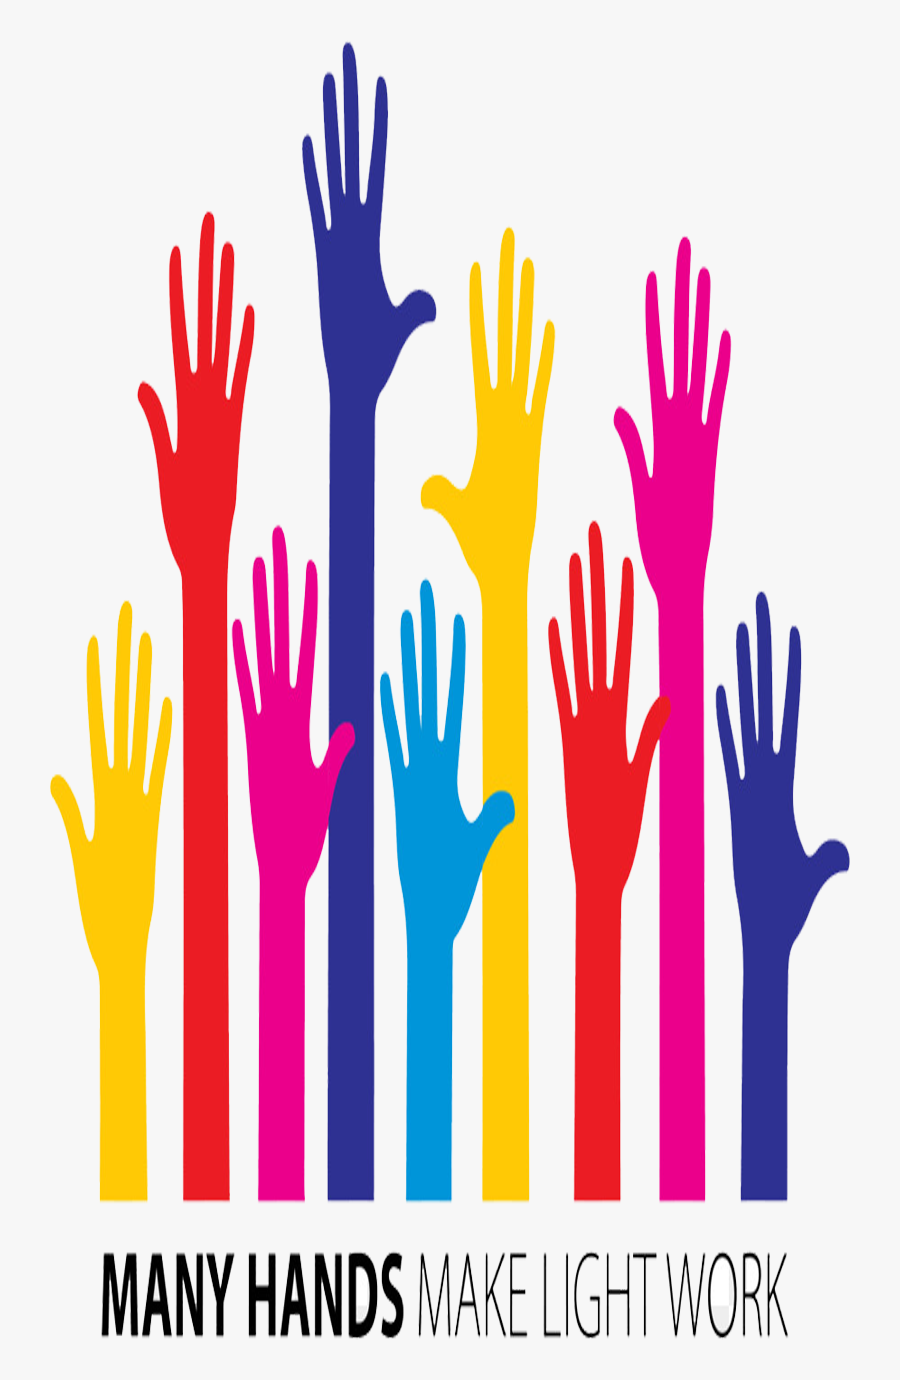 Volunteers Needed Clipart Many Hands Make Light Work - Thank You To All Volunteers, Transparent Clipart